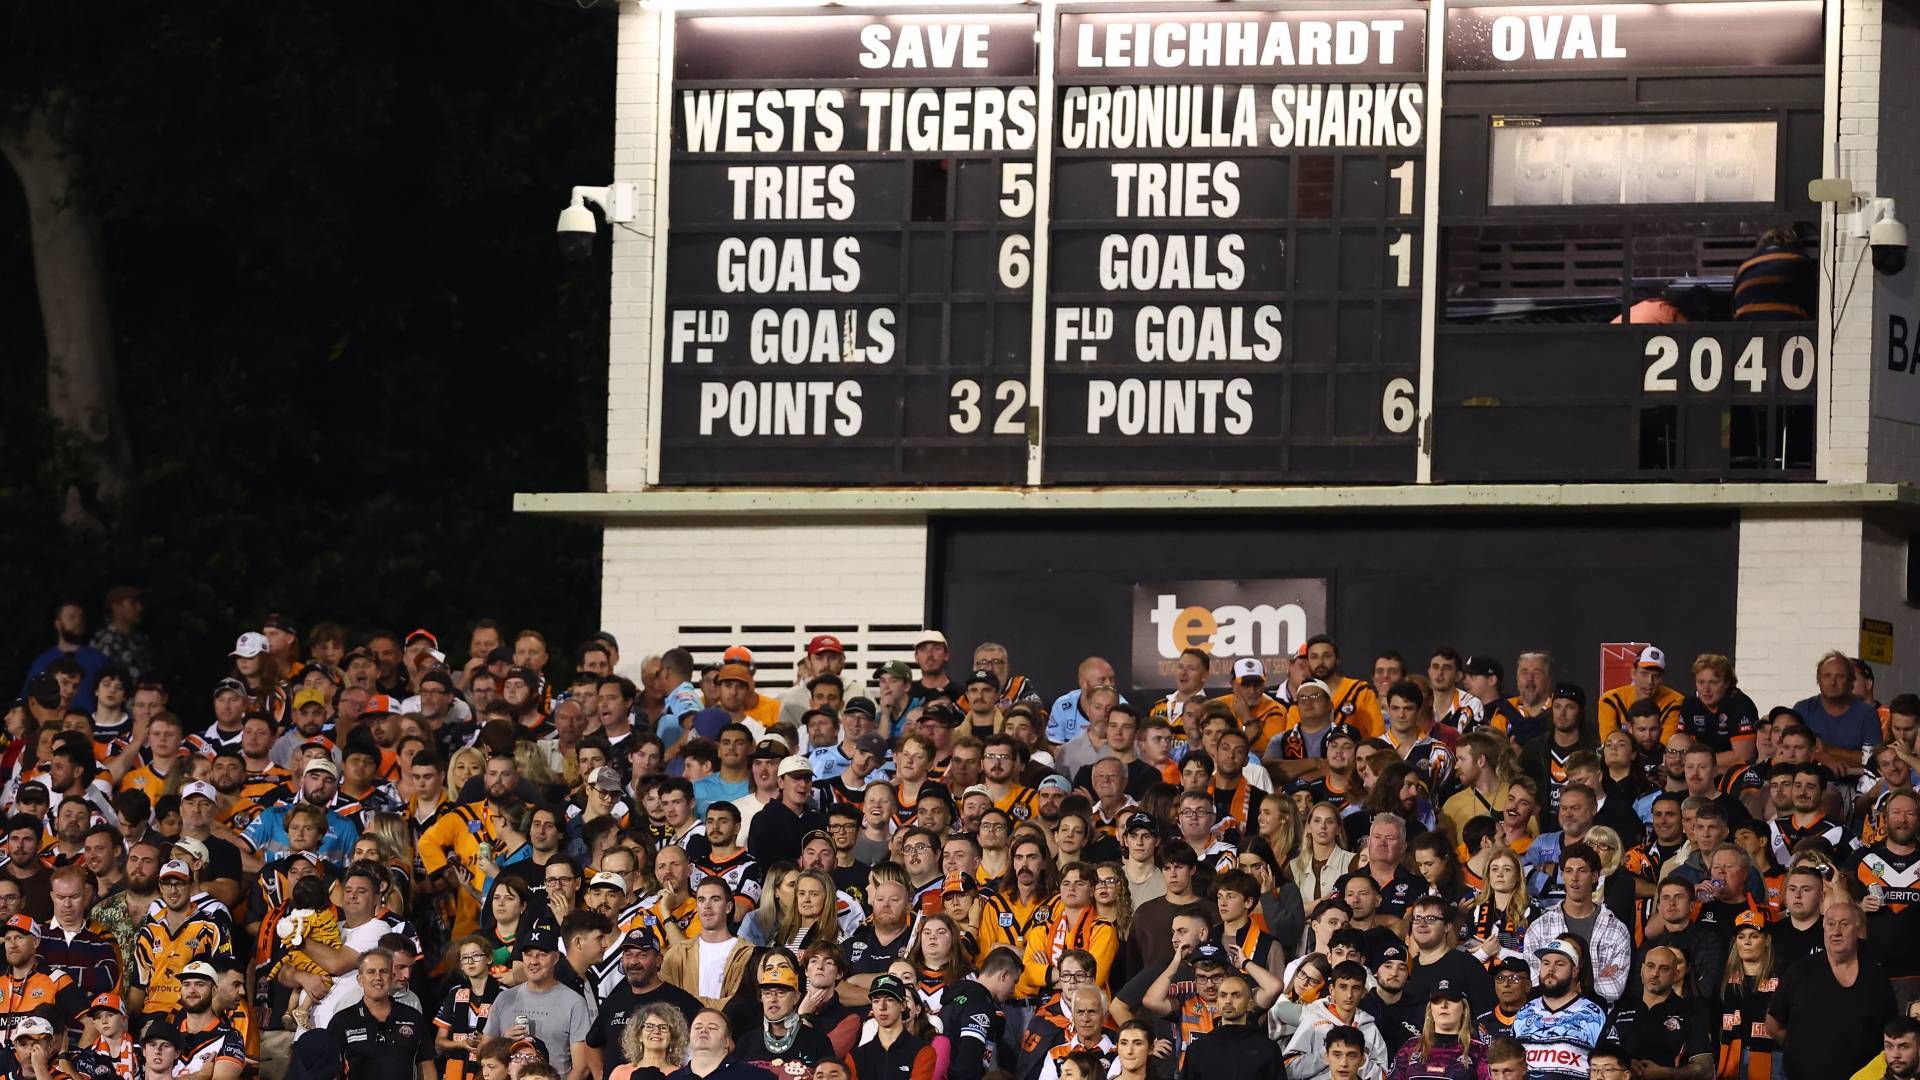 'We need assurances': Wests Tigers, local council deliver 'brutally honest' Leichhardt Oval plea